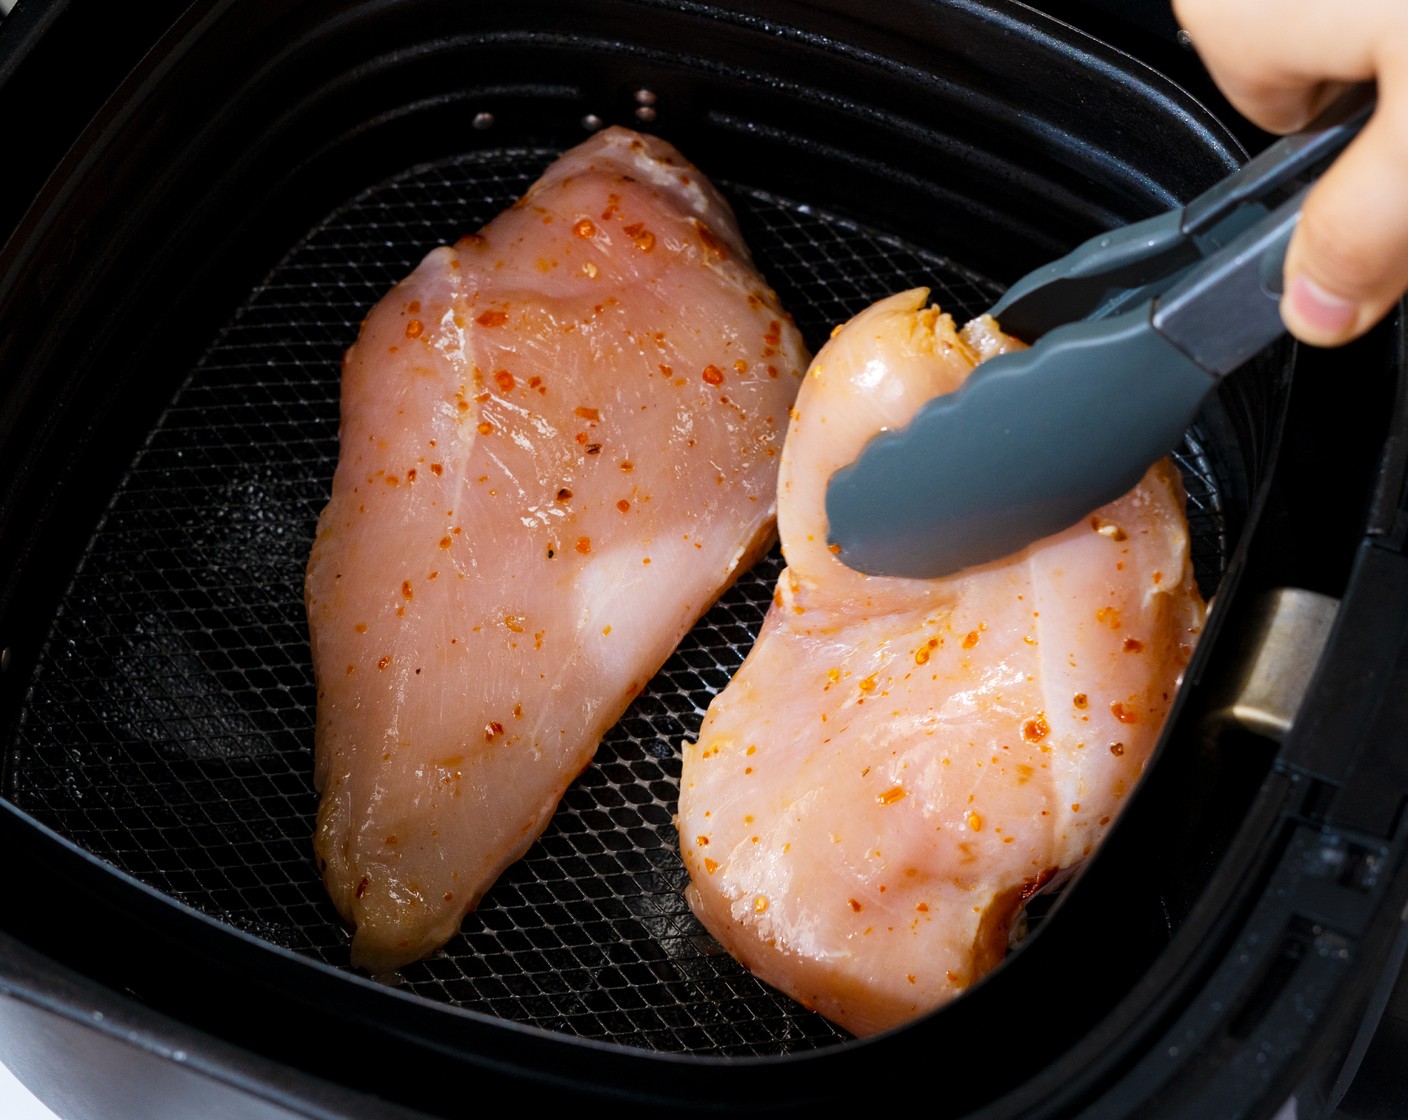 step 5 Spray the basket with oil, then place the chicken breast in. Cook for 5 minutes at 375 degrees F (190 degrees C).